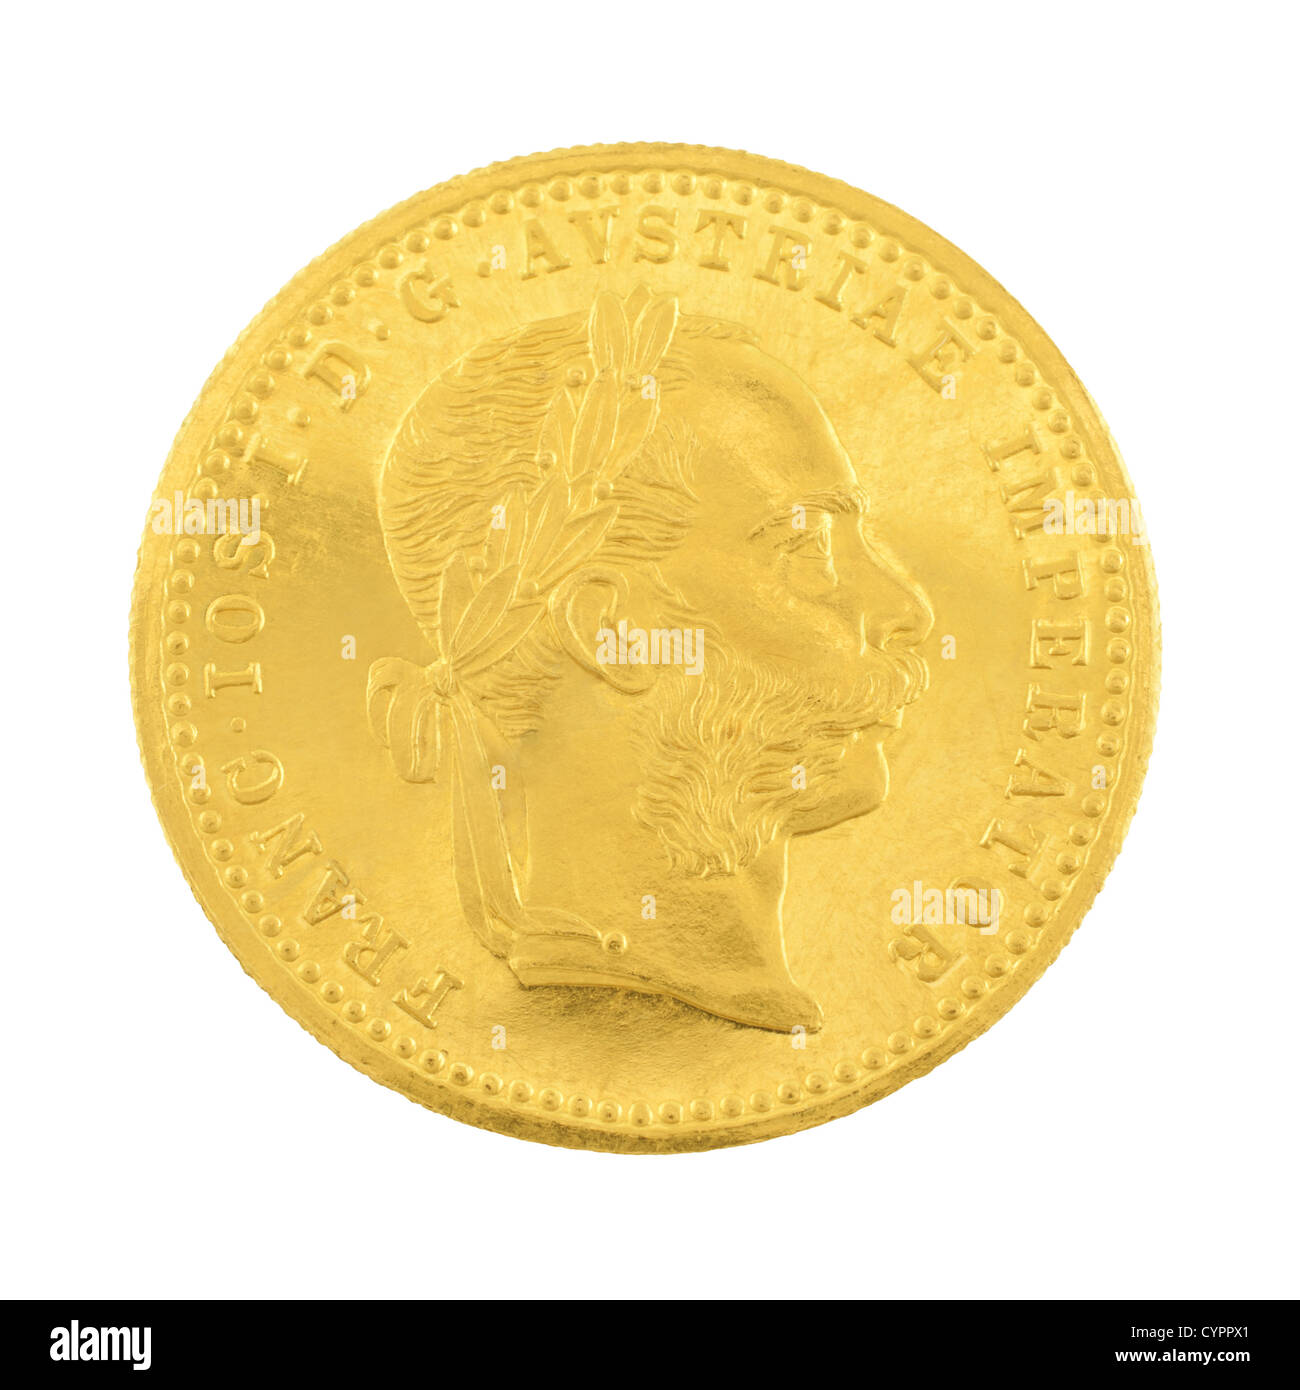 Genuine gold coin isolated on white background. Stock Photo